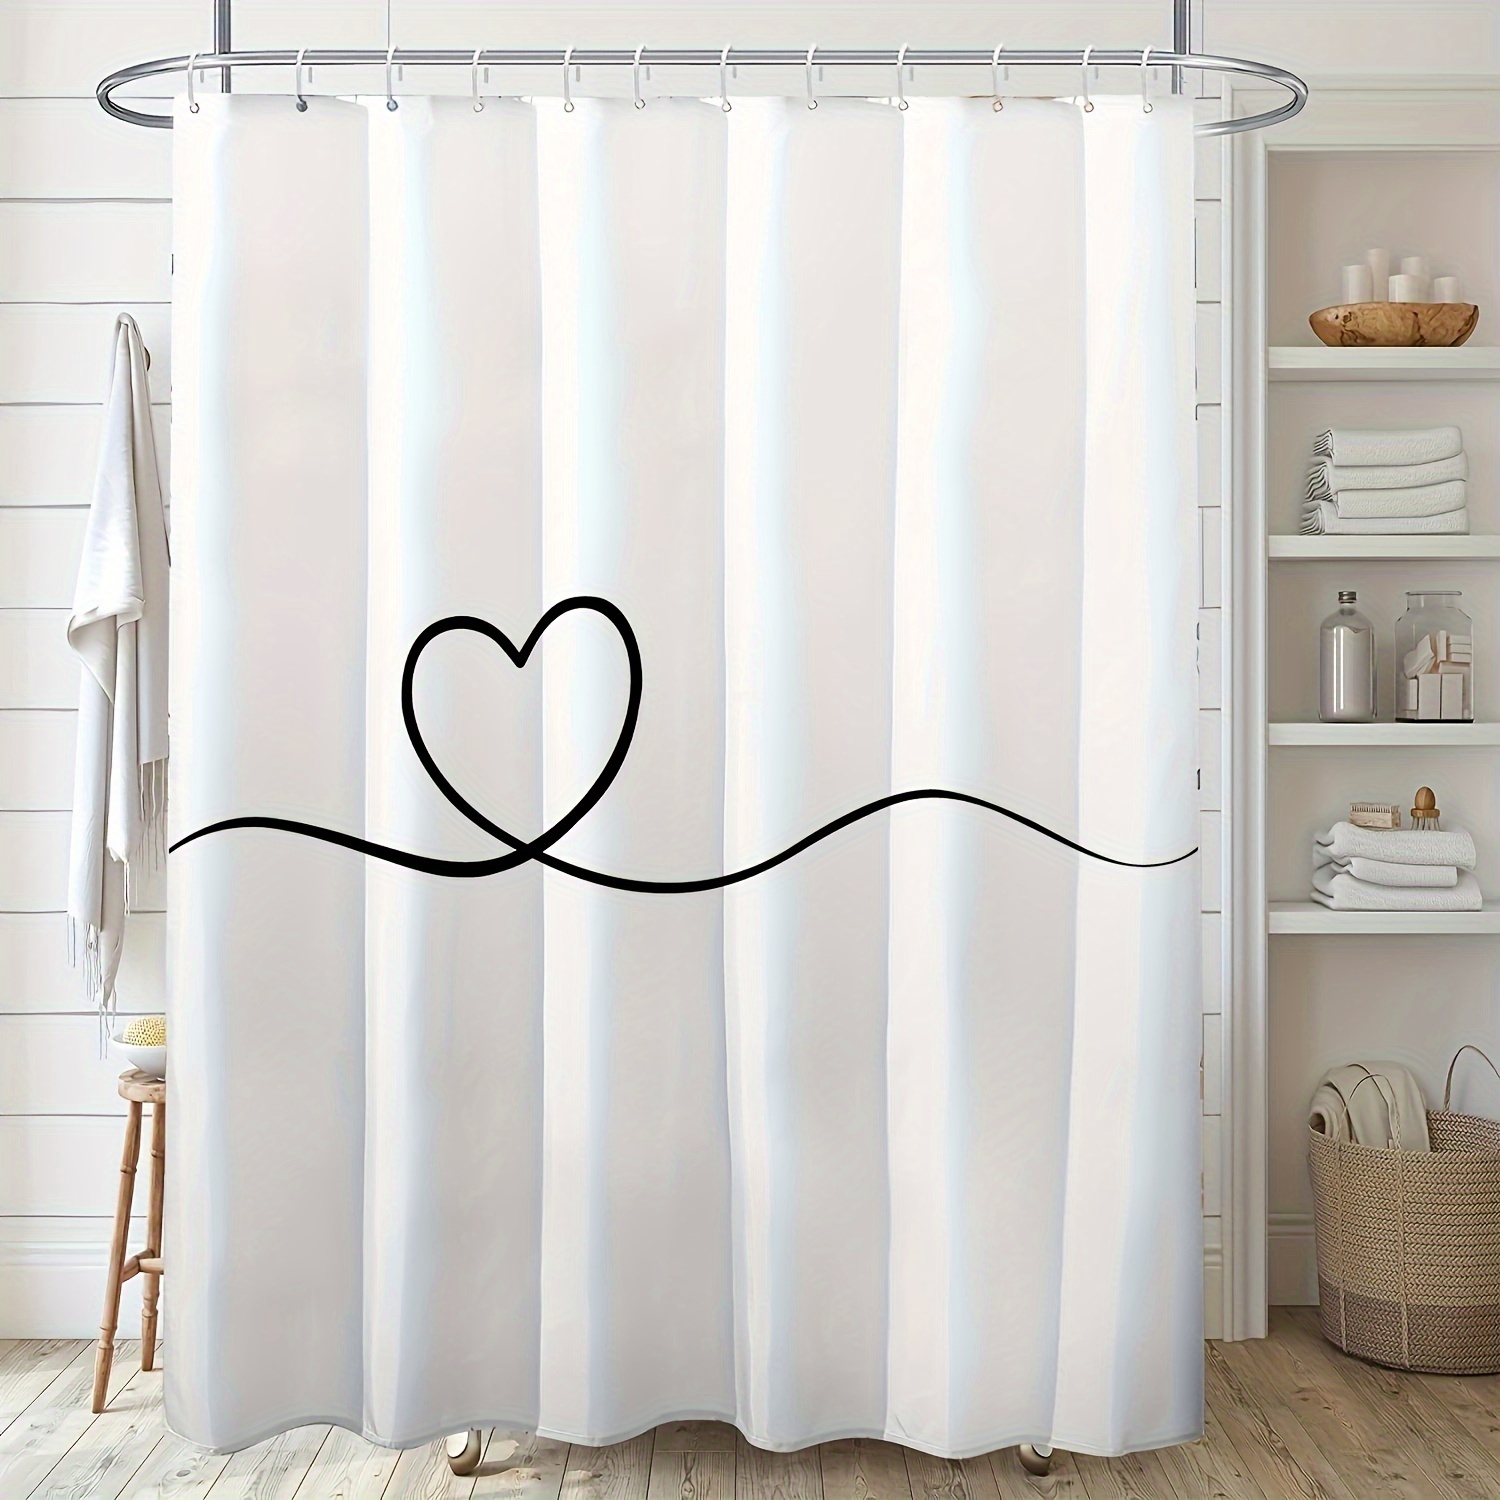 1pc Pink Heart-shaped Valentine's Day Shower Curtain/christmas